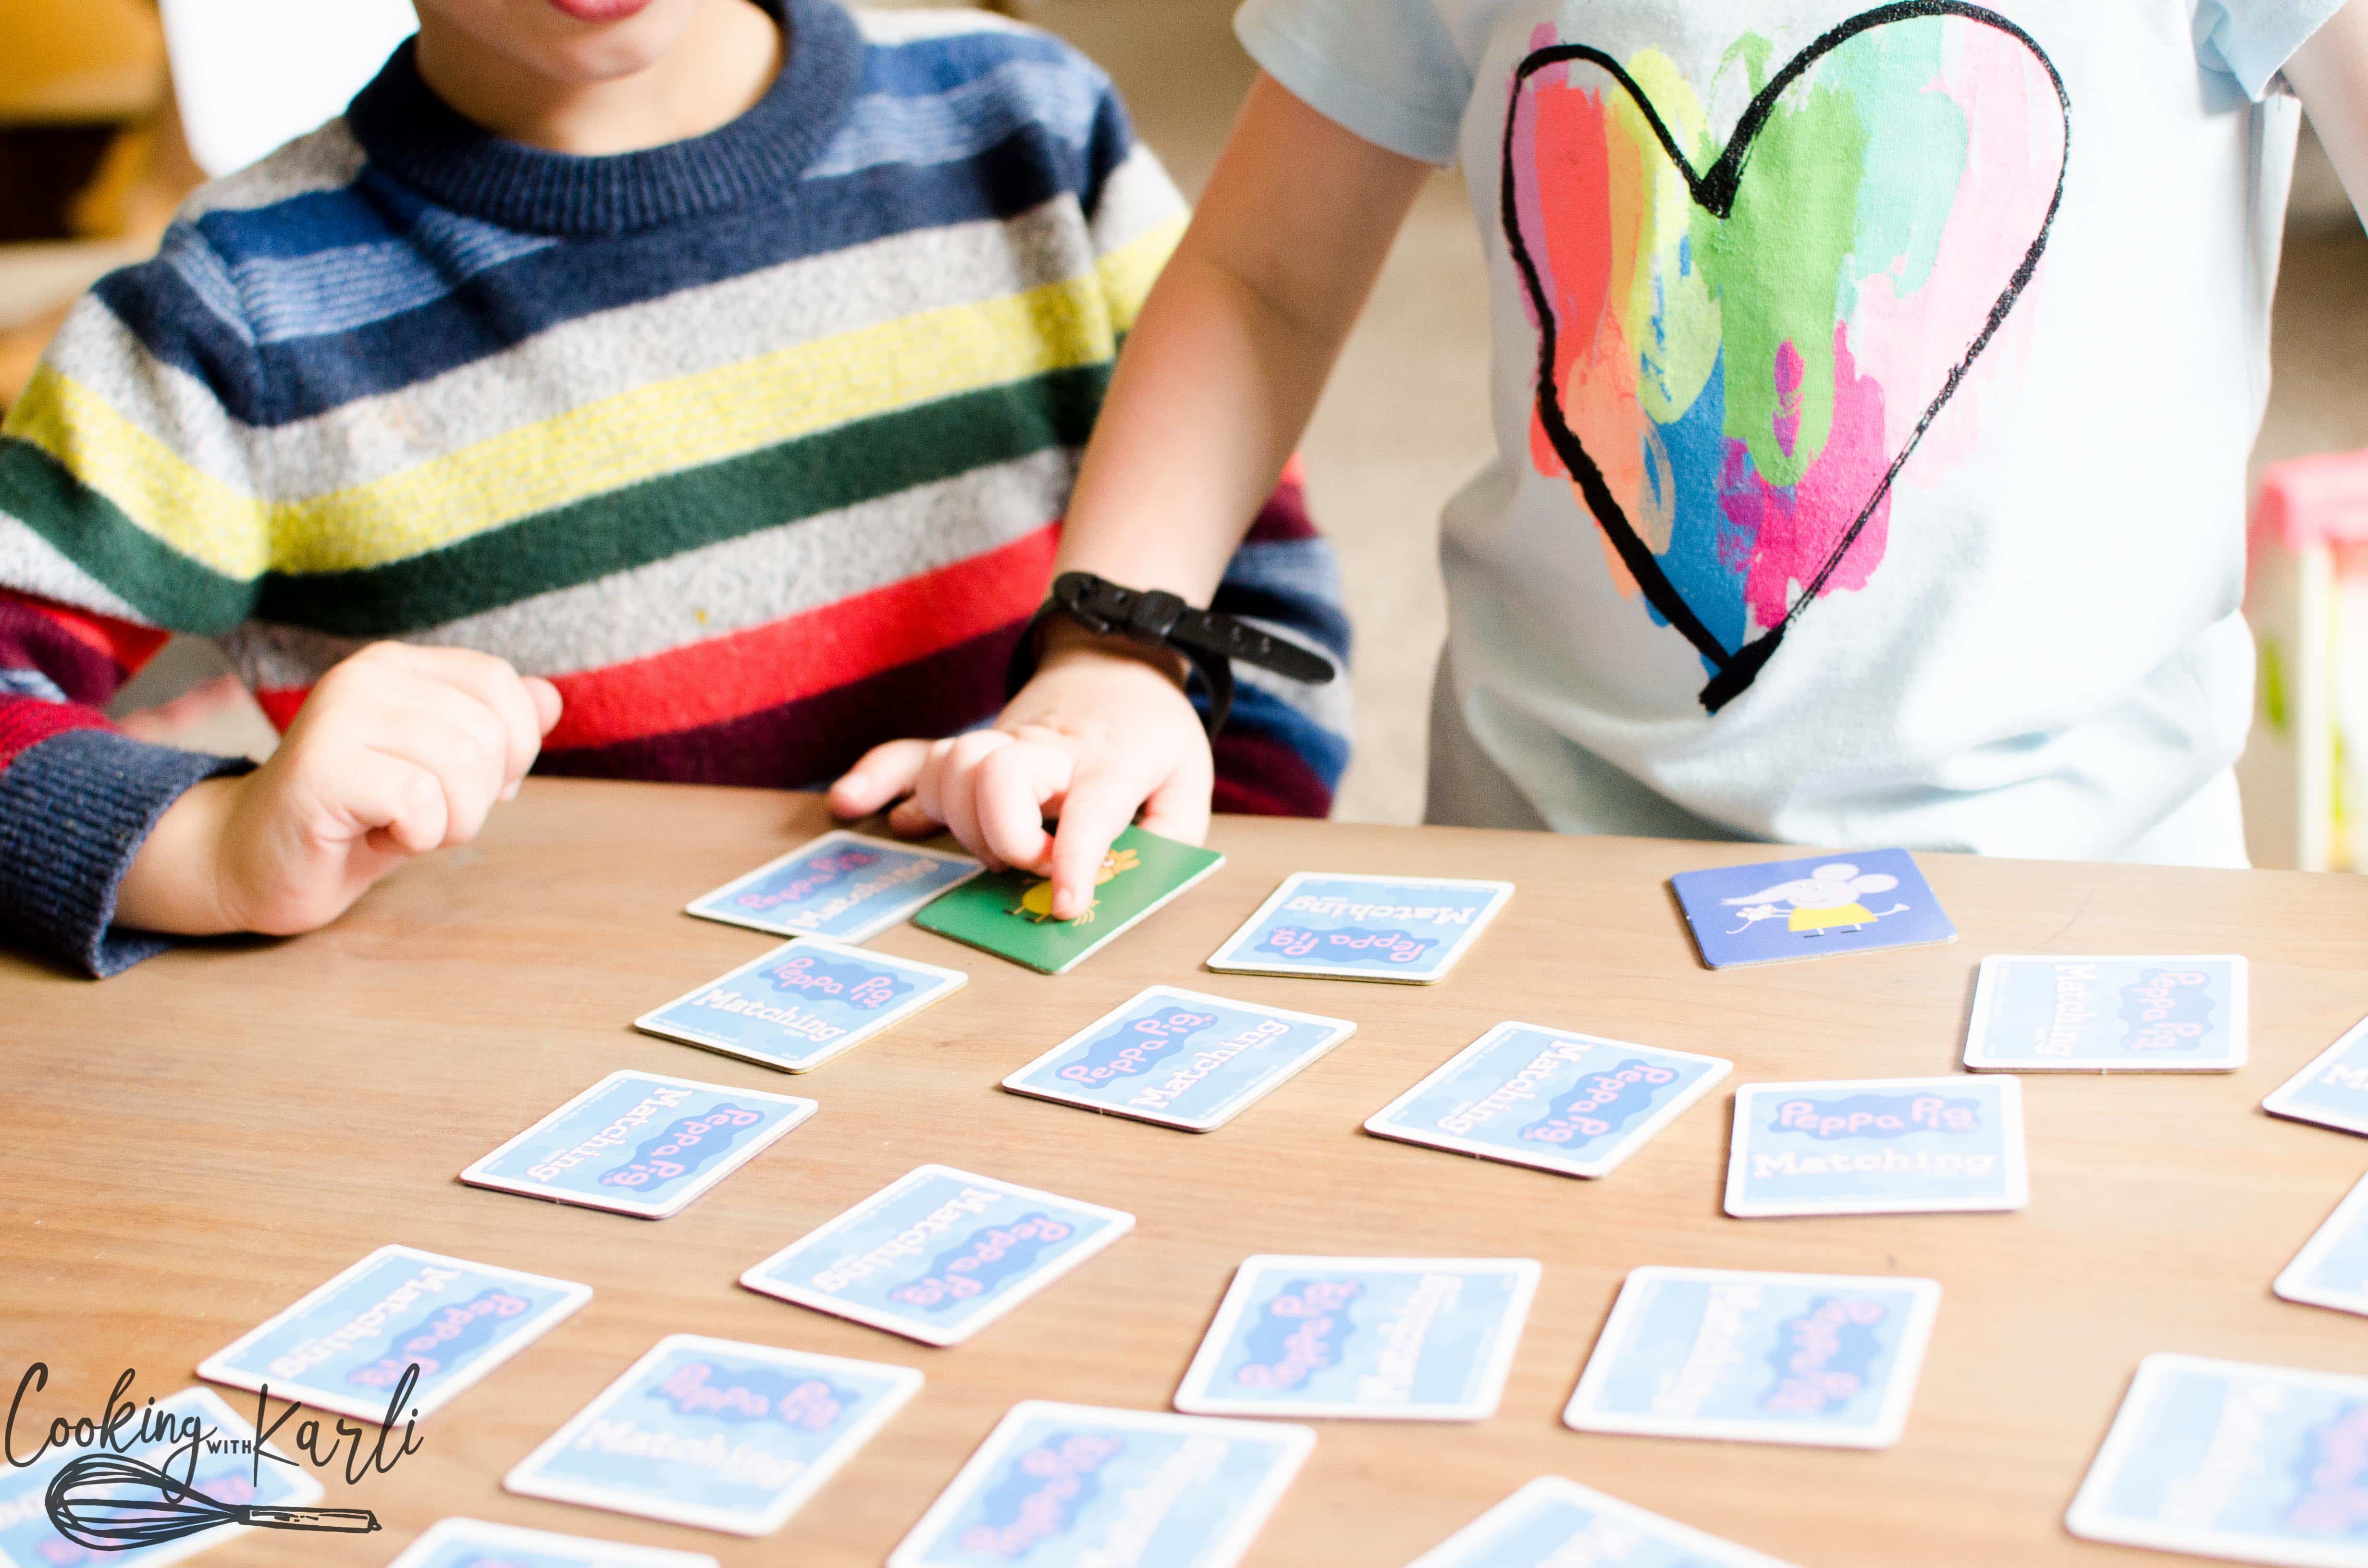 Playing 'memory' is a fun kid's activity that helps the brain develop correctly.